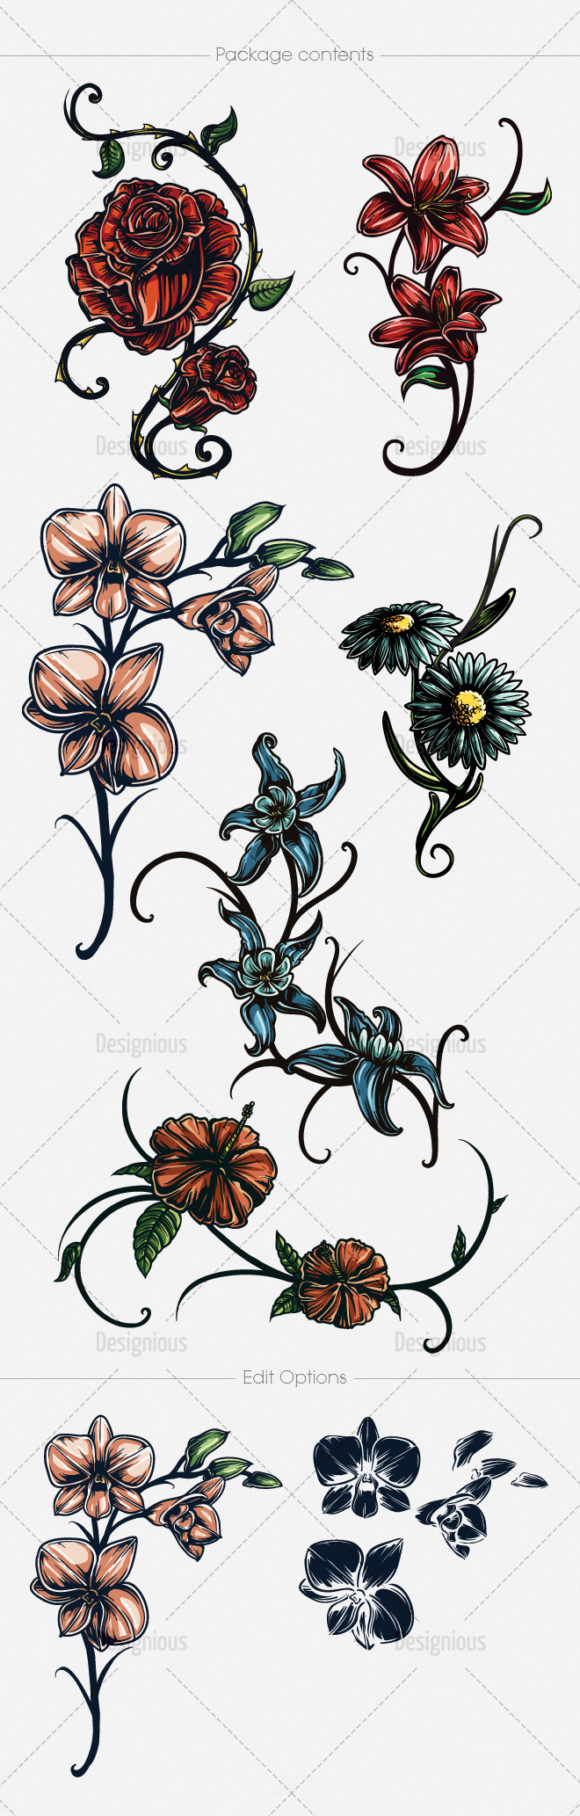 Floral Vector Pack 136 2